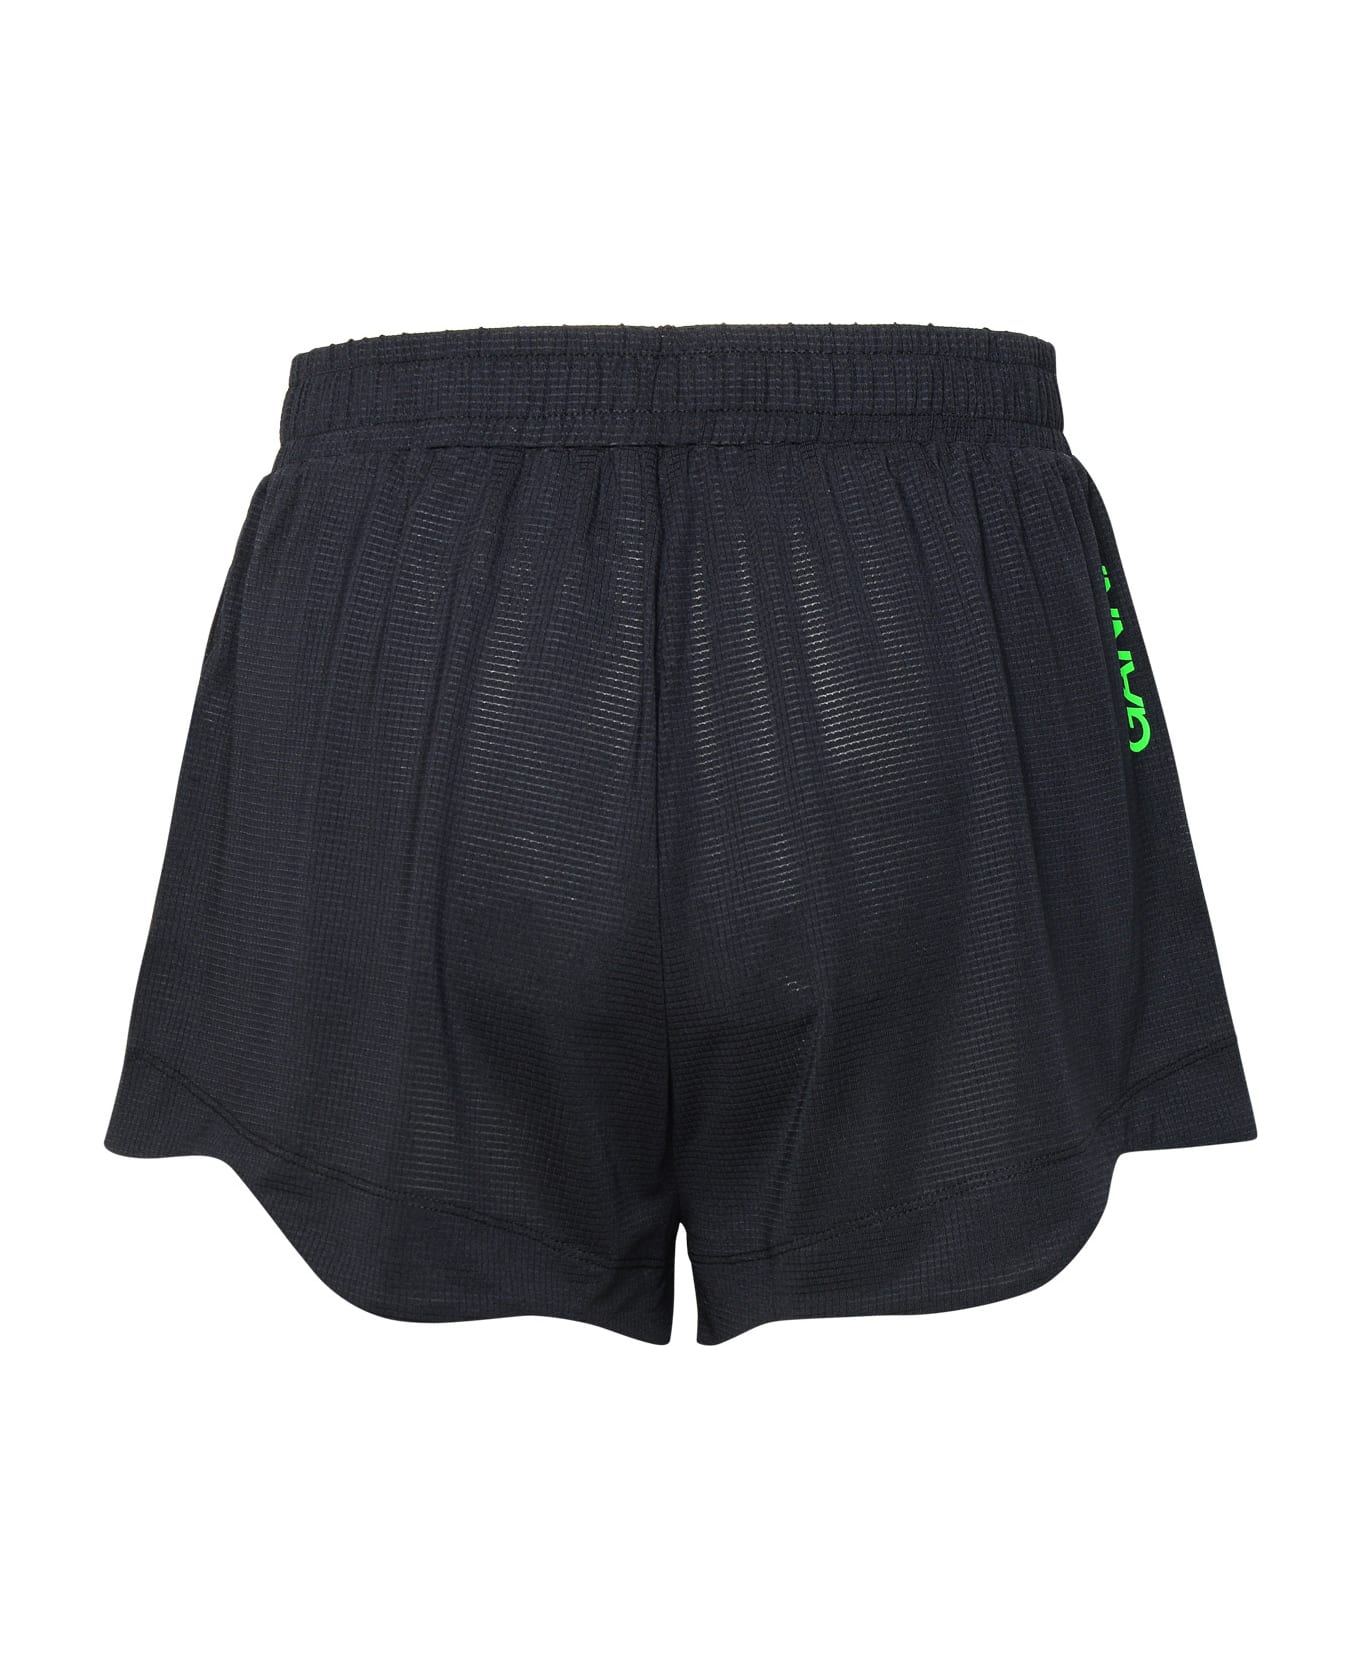 Ganni 'active' Shorts In Black Recycled Polyester Blend - Black ショートパンツ